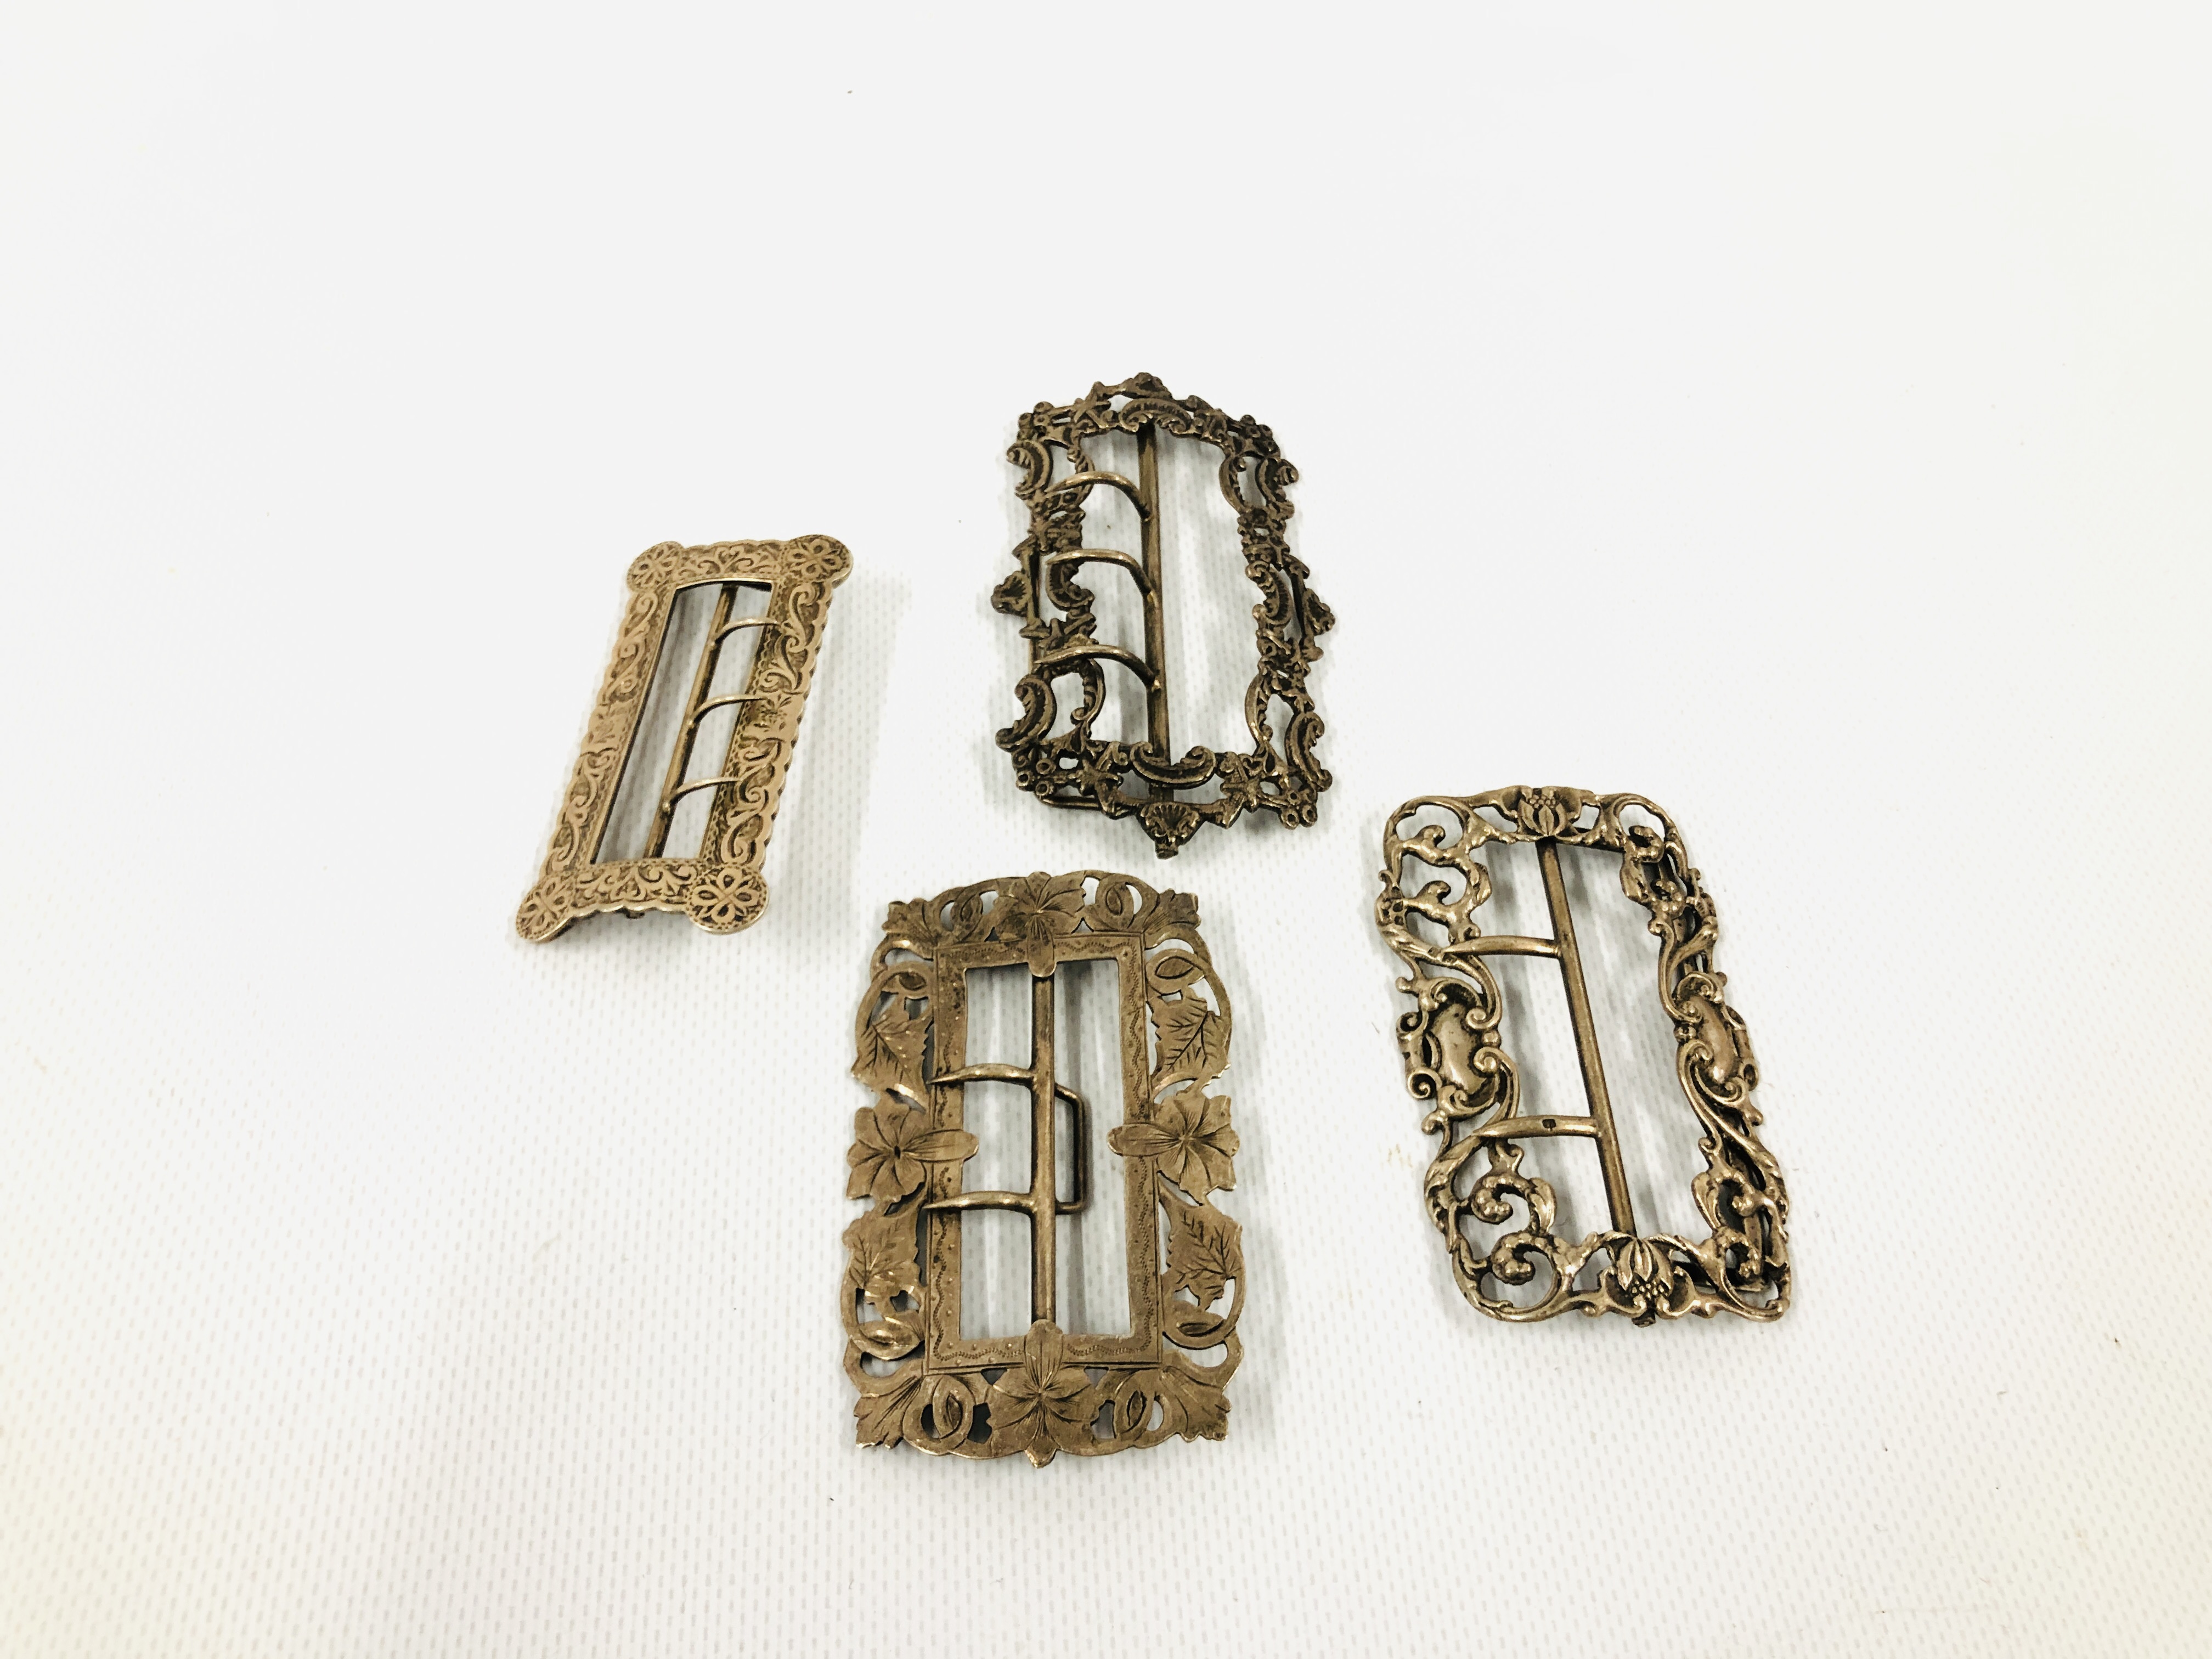 A GROUP OF FOUR SILVER BUCKLES OF SHAPED RECTANGULAR FORM INCLUDING ONE BY R&W BIRMINGHAM.